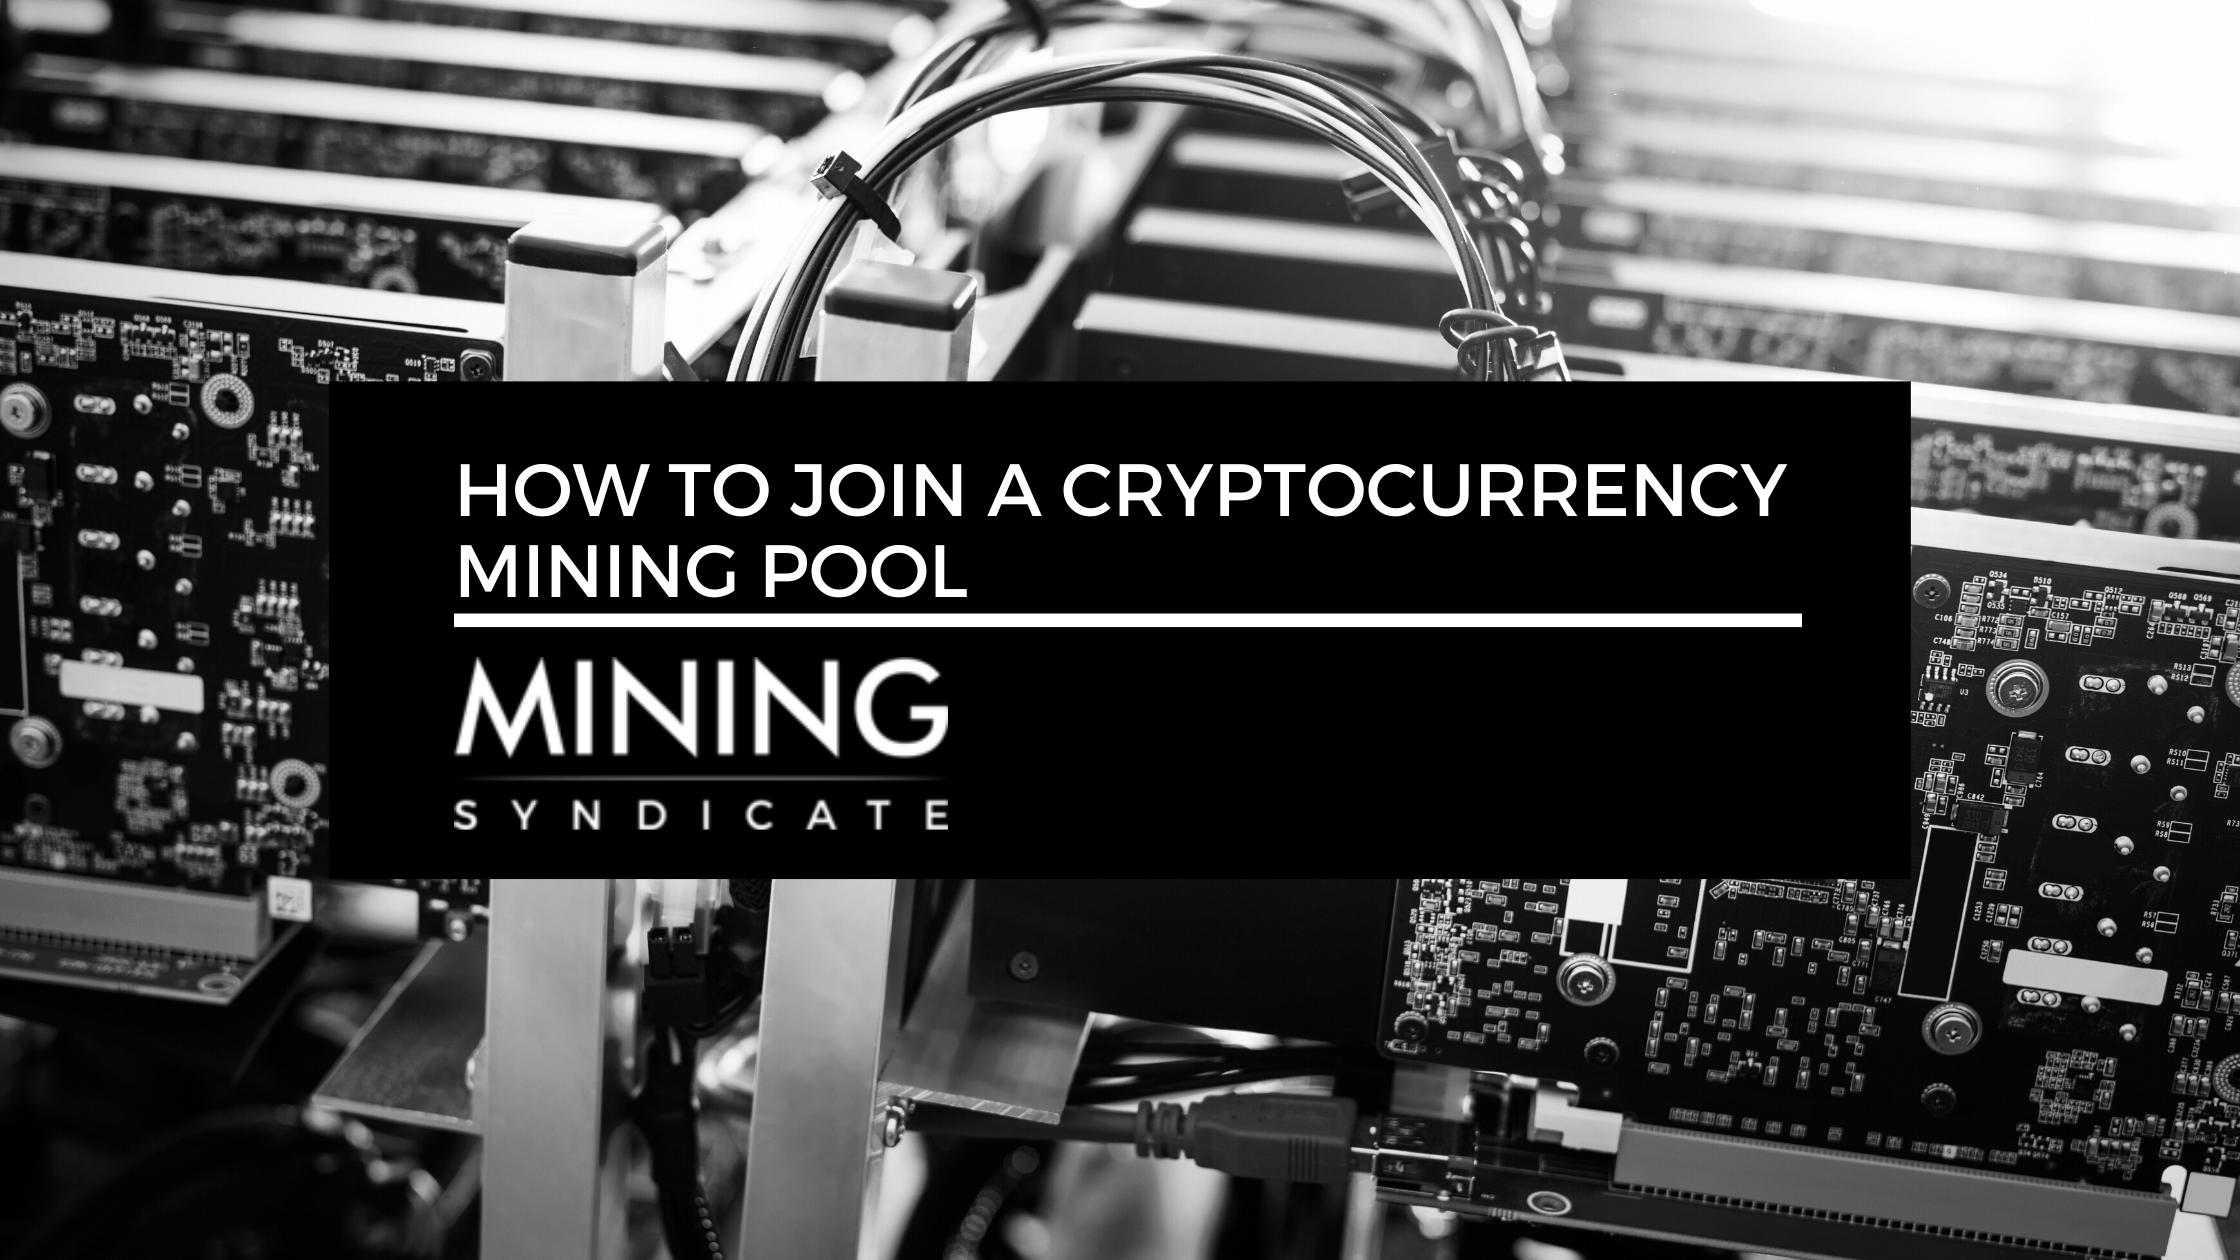 mining crypto pool pay low and wait